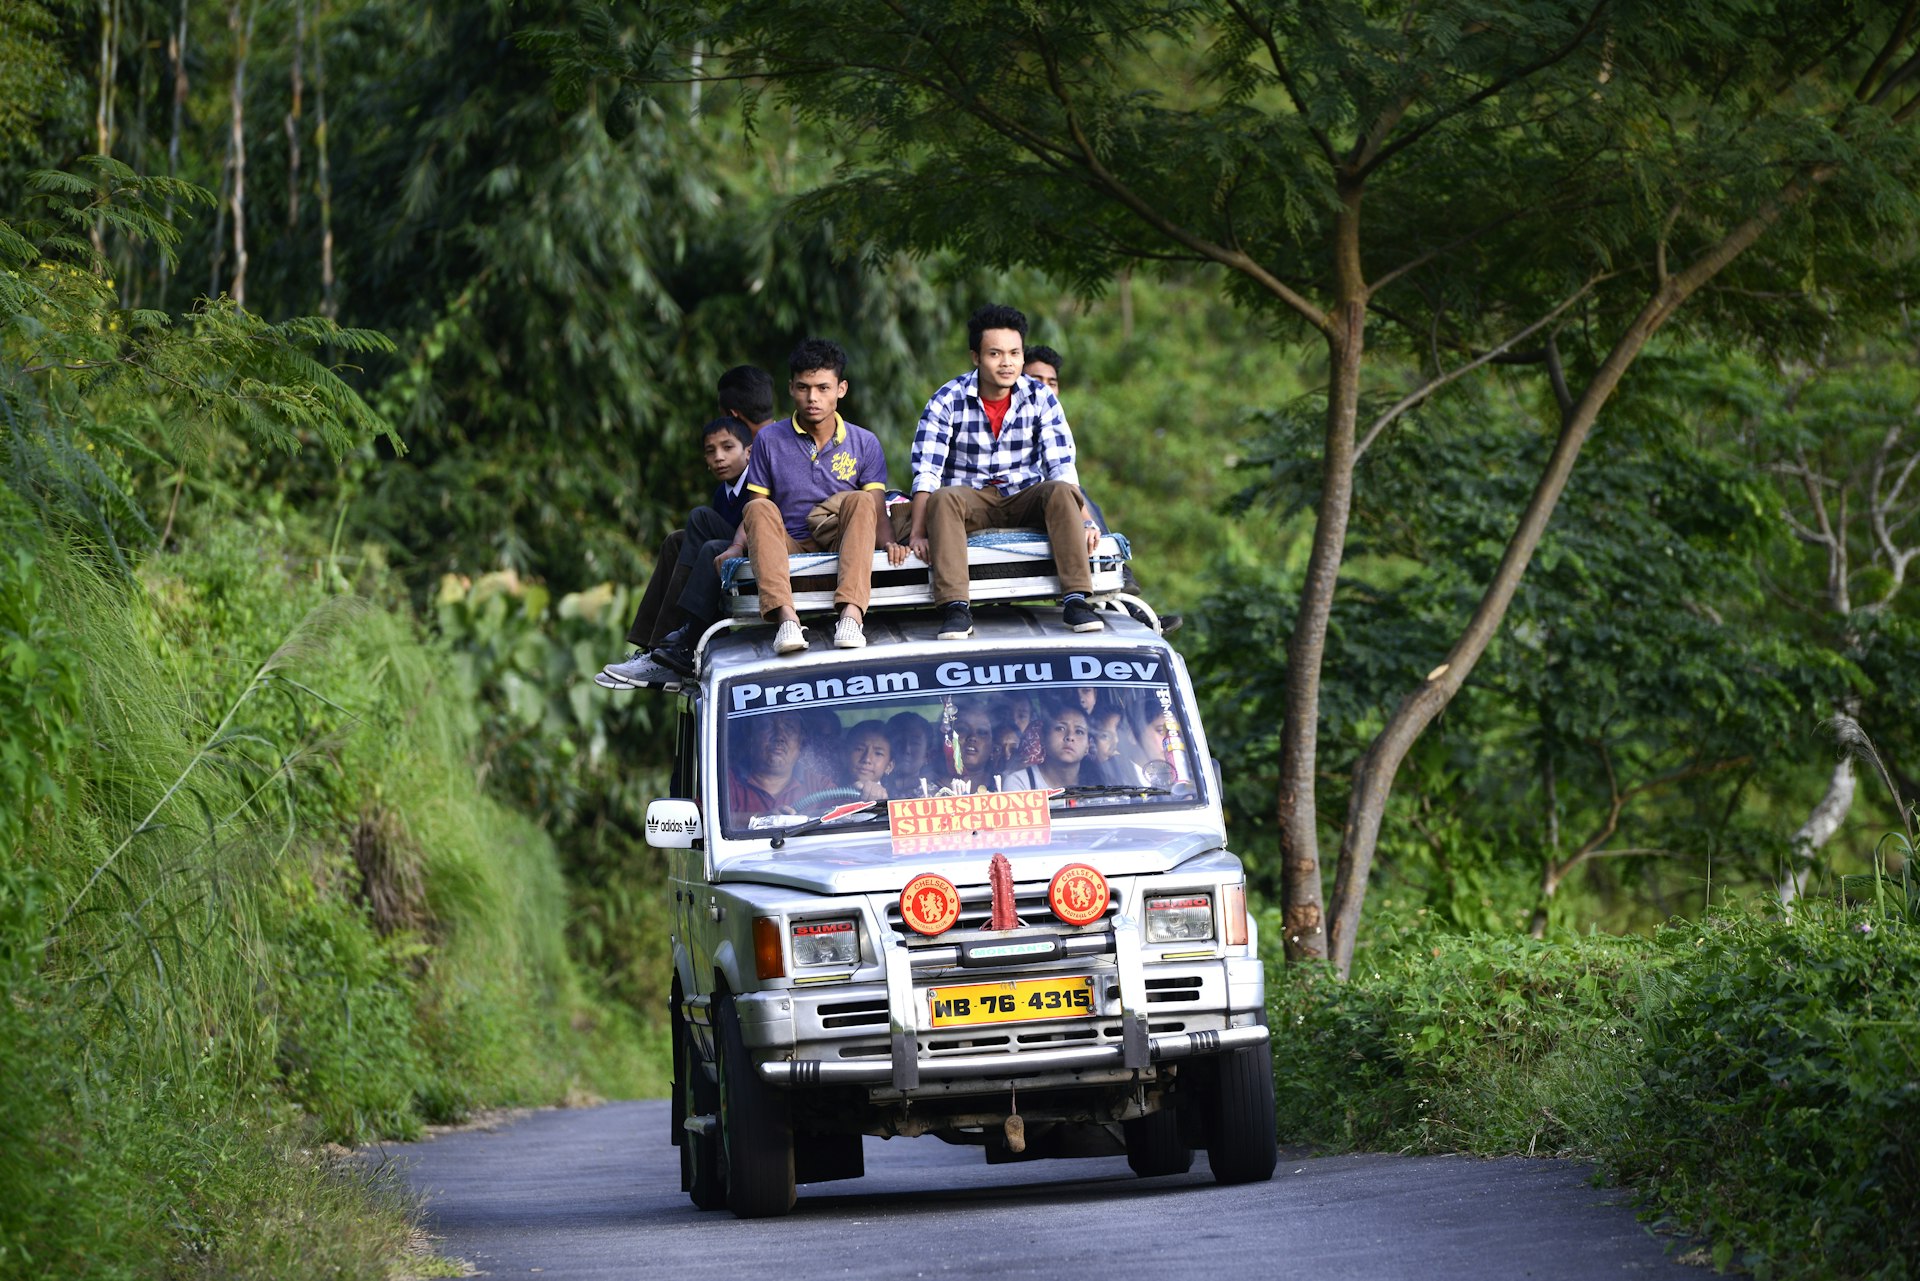 A shared taxi full of passengers on a small mountain road in Darjeeling district, India